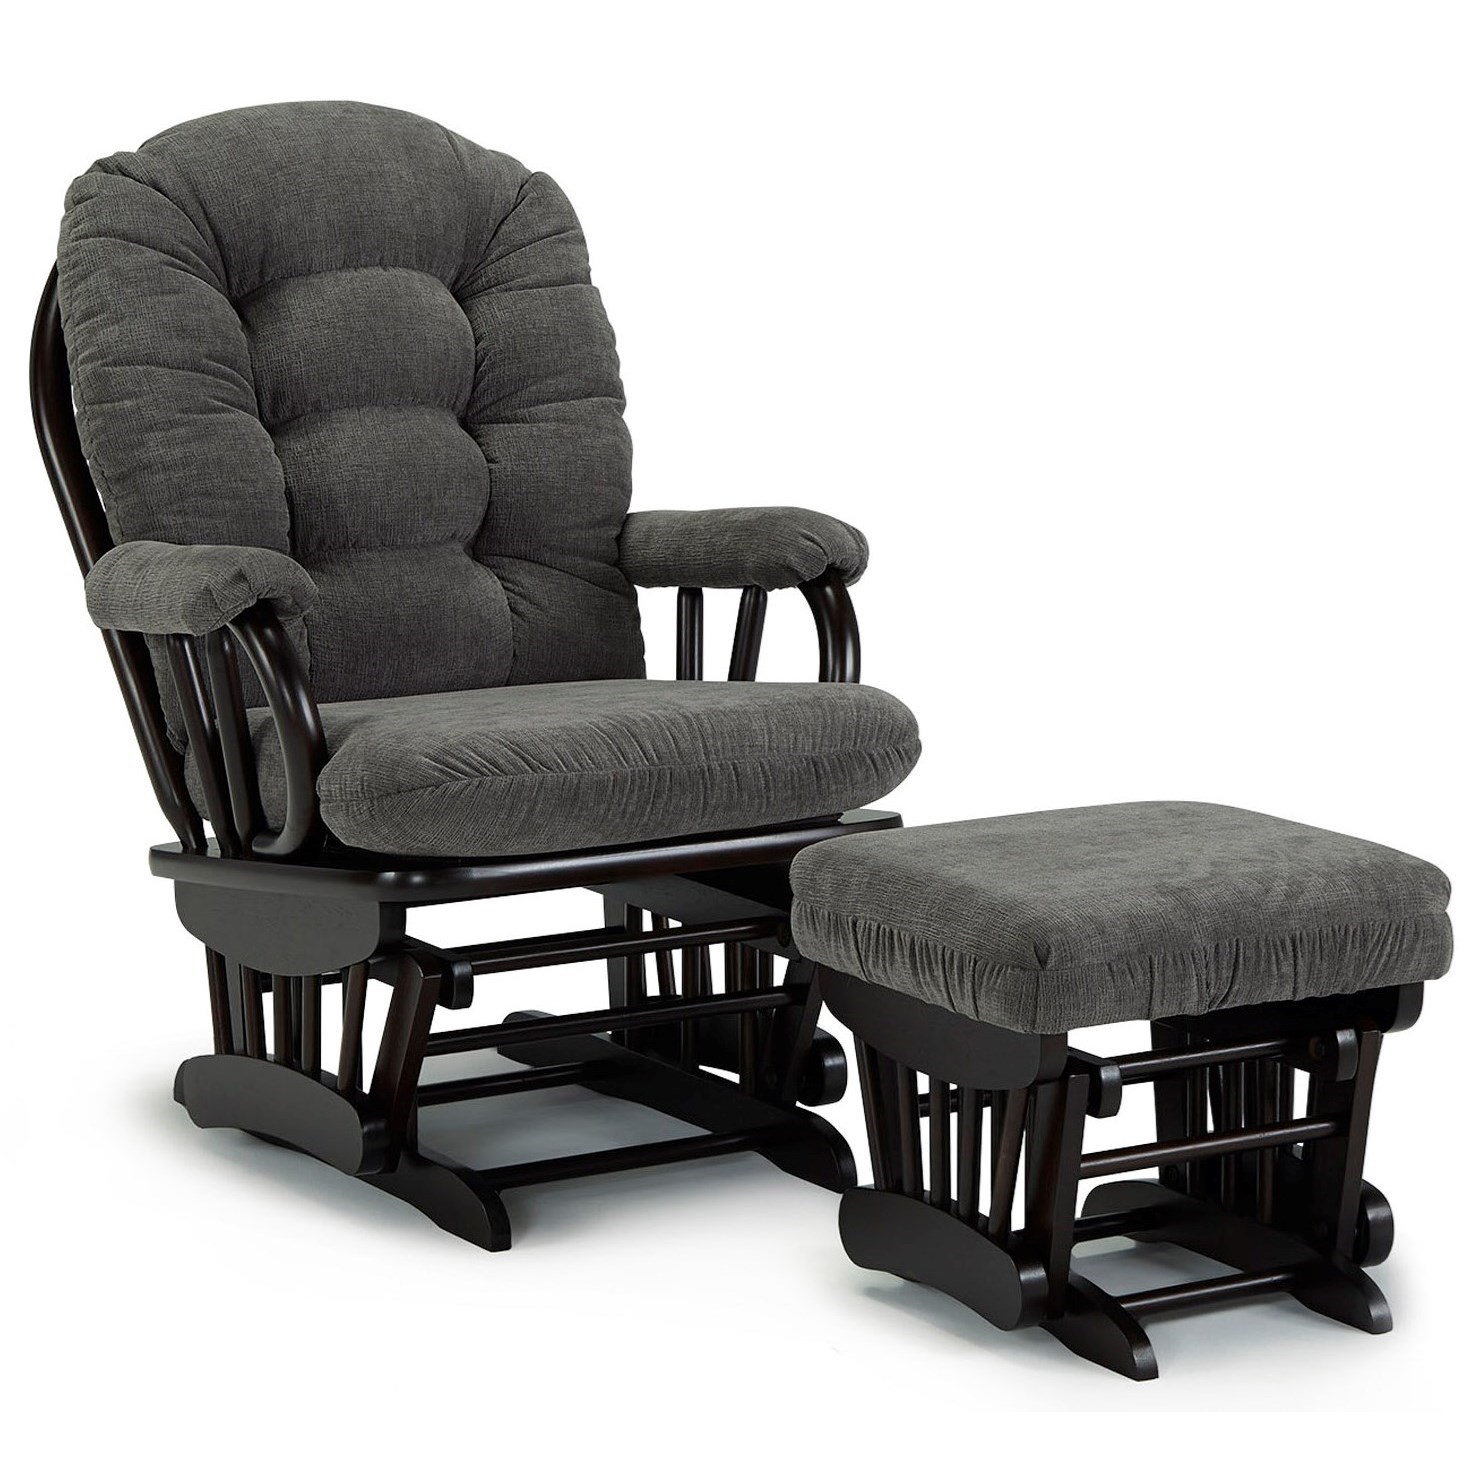 best chairs inc glider rocker replacement cushions